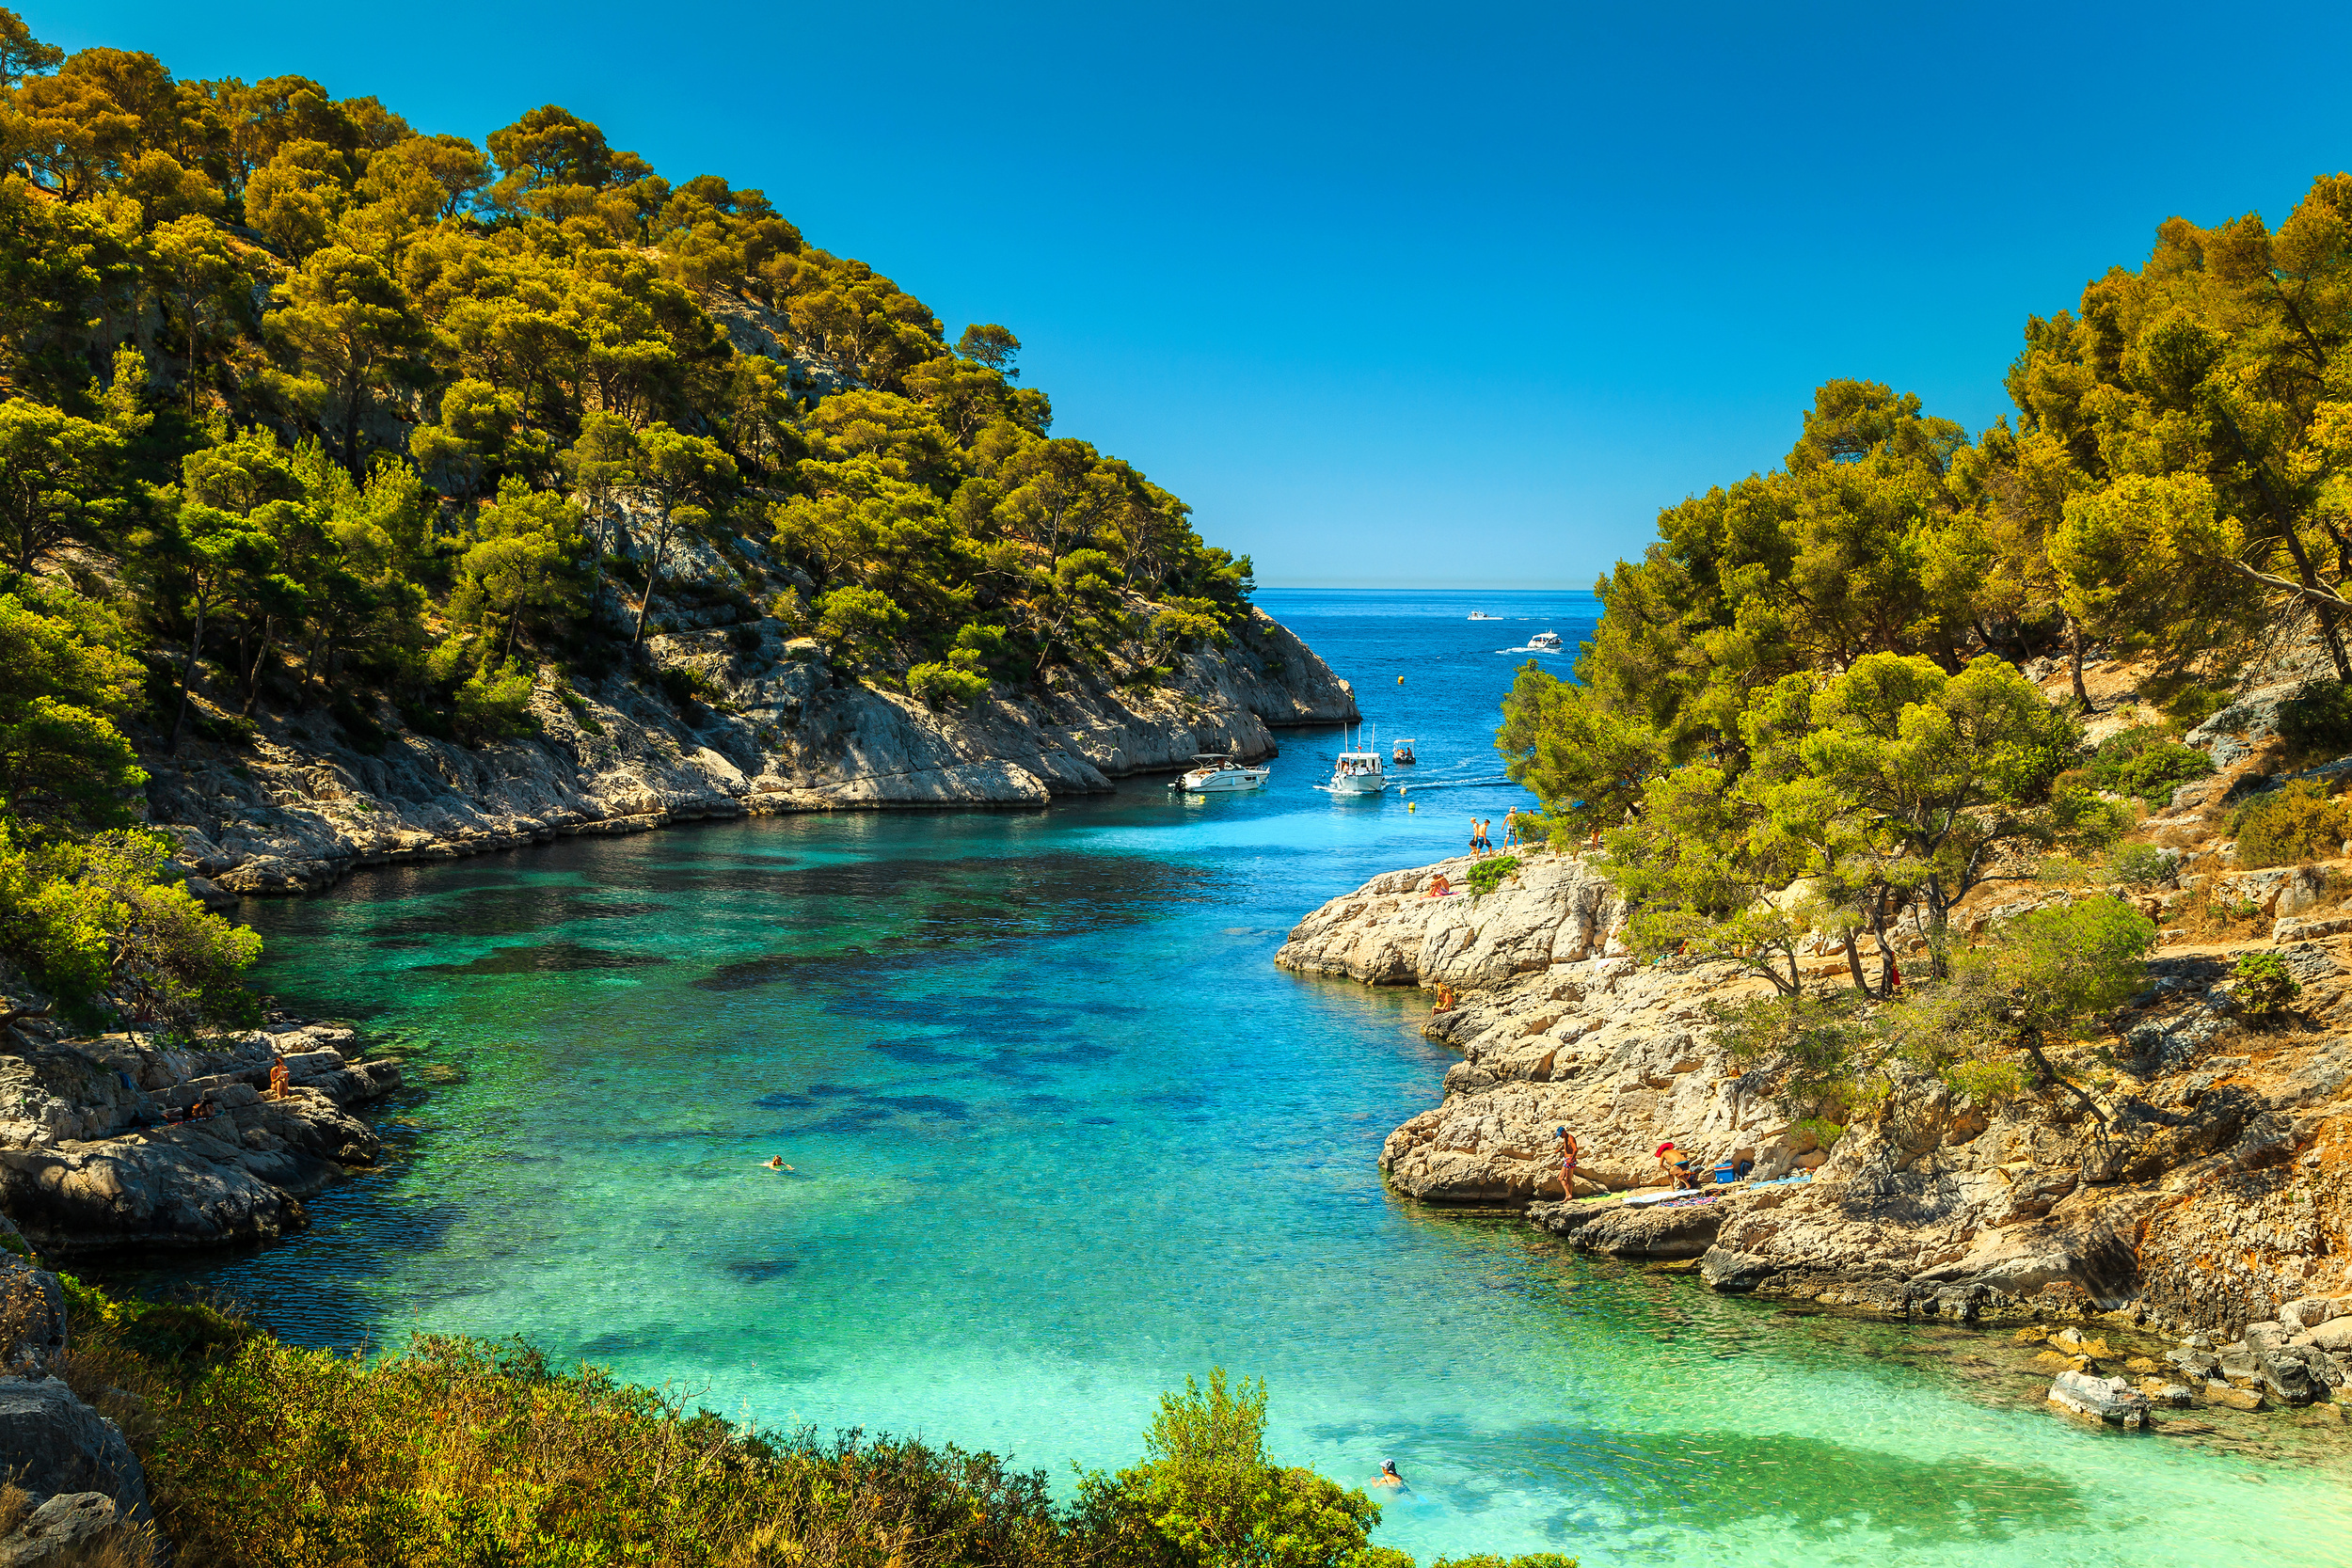 <p>If you love small towns along the water, then you'll love Cassis. Like Menton, it's a great alternative base and jumping-off point to explore Calanques National Park. The first calanque (small cove) is just a 30-minute walk from town.</p><p><a href='https://www.msn.com/en-us/community/channel/vid-cj9pqbr0vn9in2b6ddcd8sfgpfq6x6utp44fssrv6mc2gtybw0us'>Follow us on MSN to see more of our exclusive lifestyle content.</a></p>